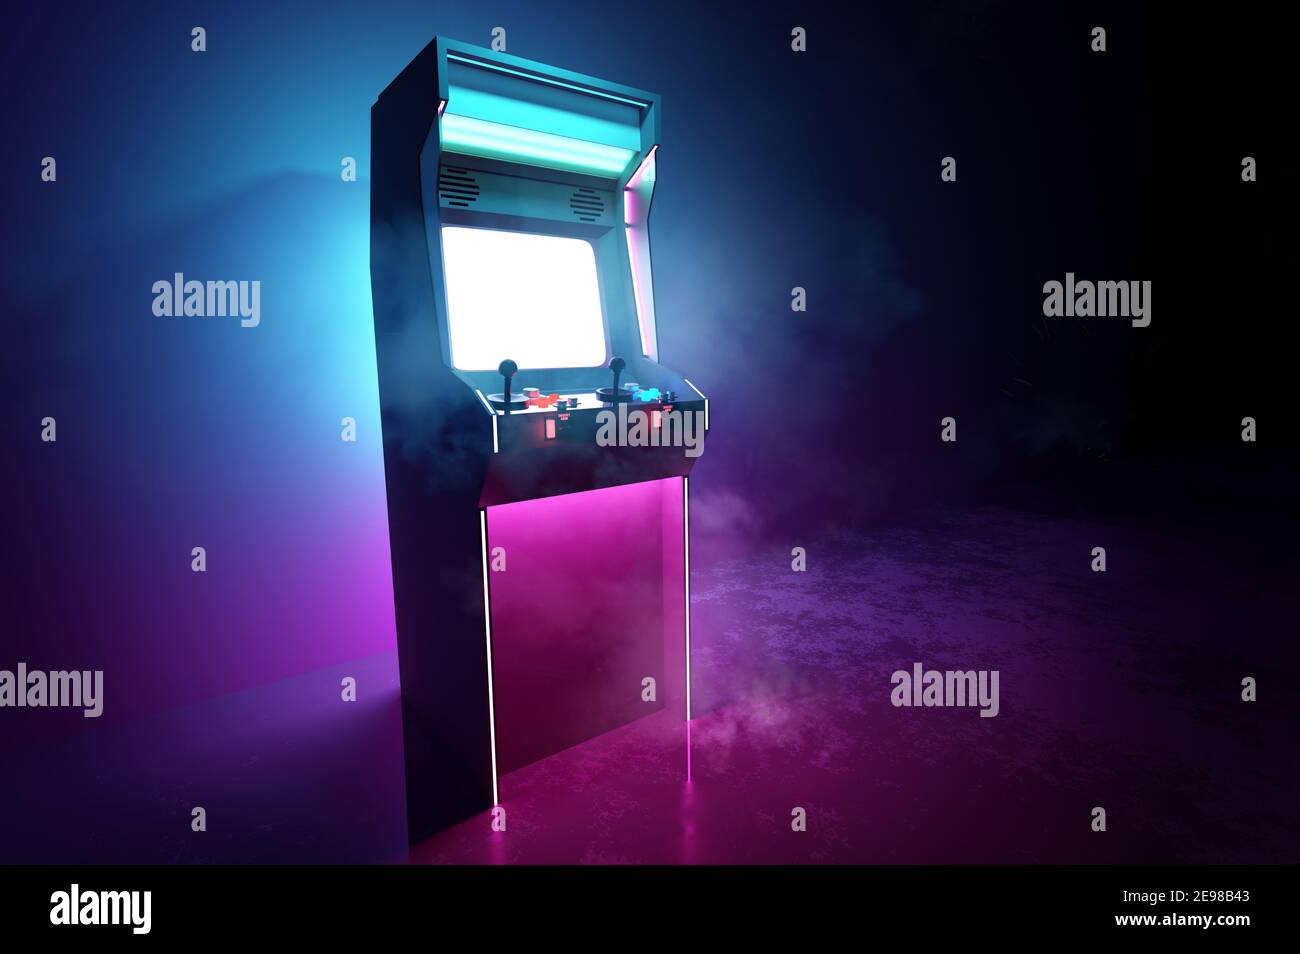 Neon pink and cyan glowing retro games arcade machine background. 3D illustration. Stock Photo